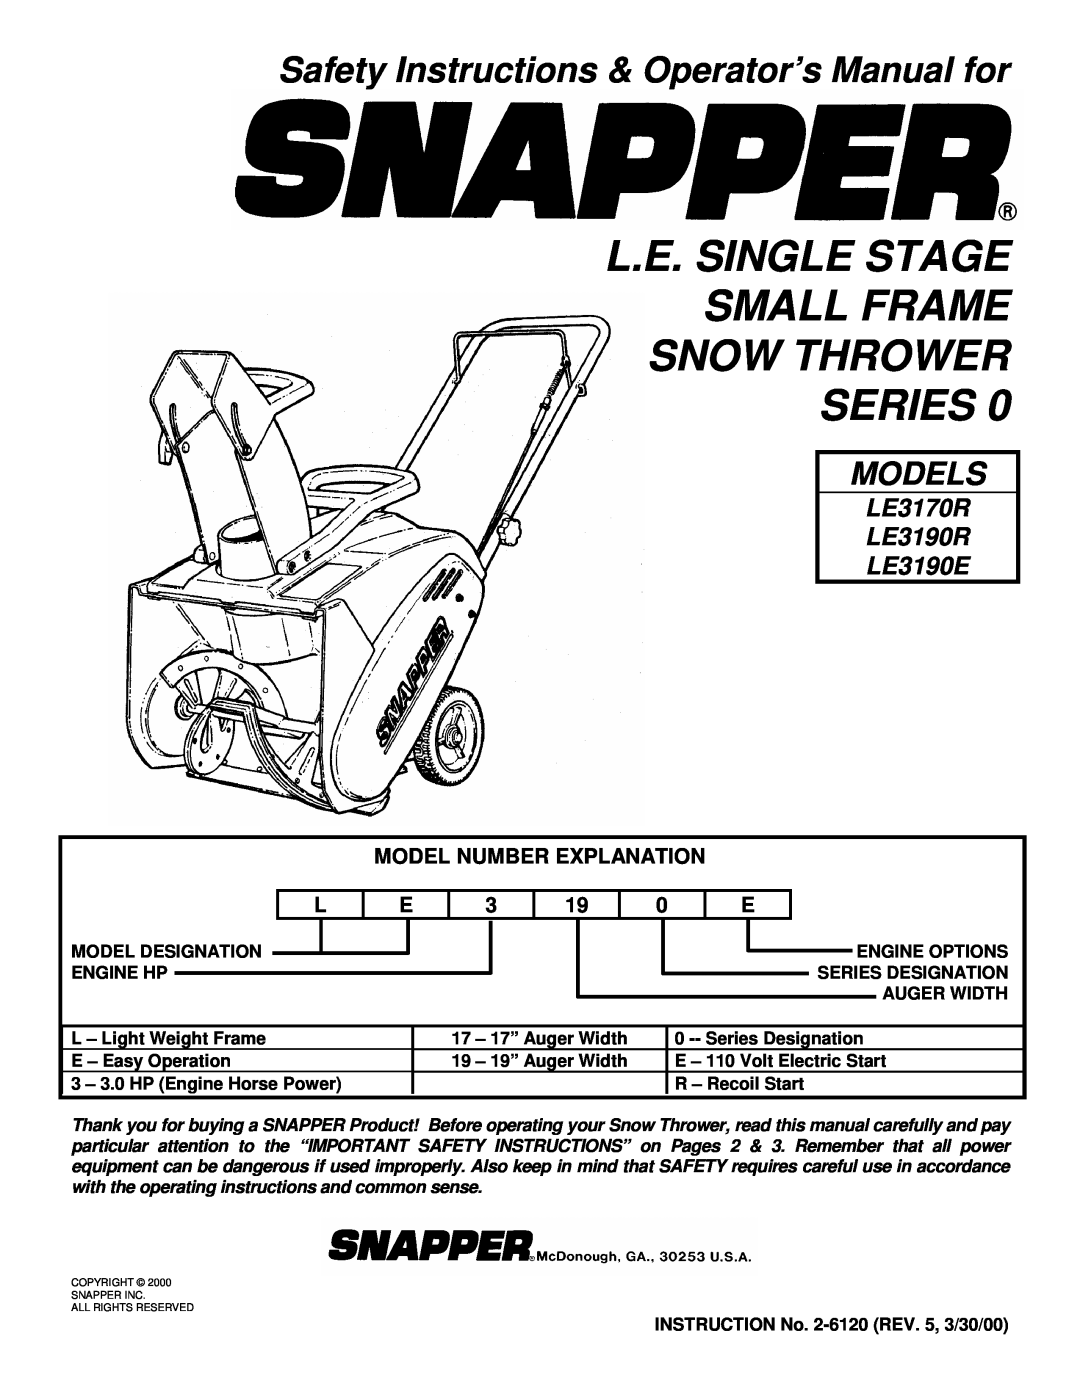 Snapper LE3170R, LE3190R, LE3190E important safety instructions L.E. Single Stage Small Frame Snow Thrower Series, Models 